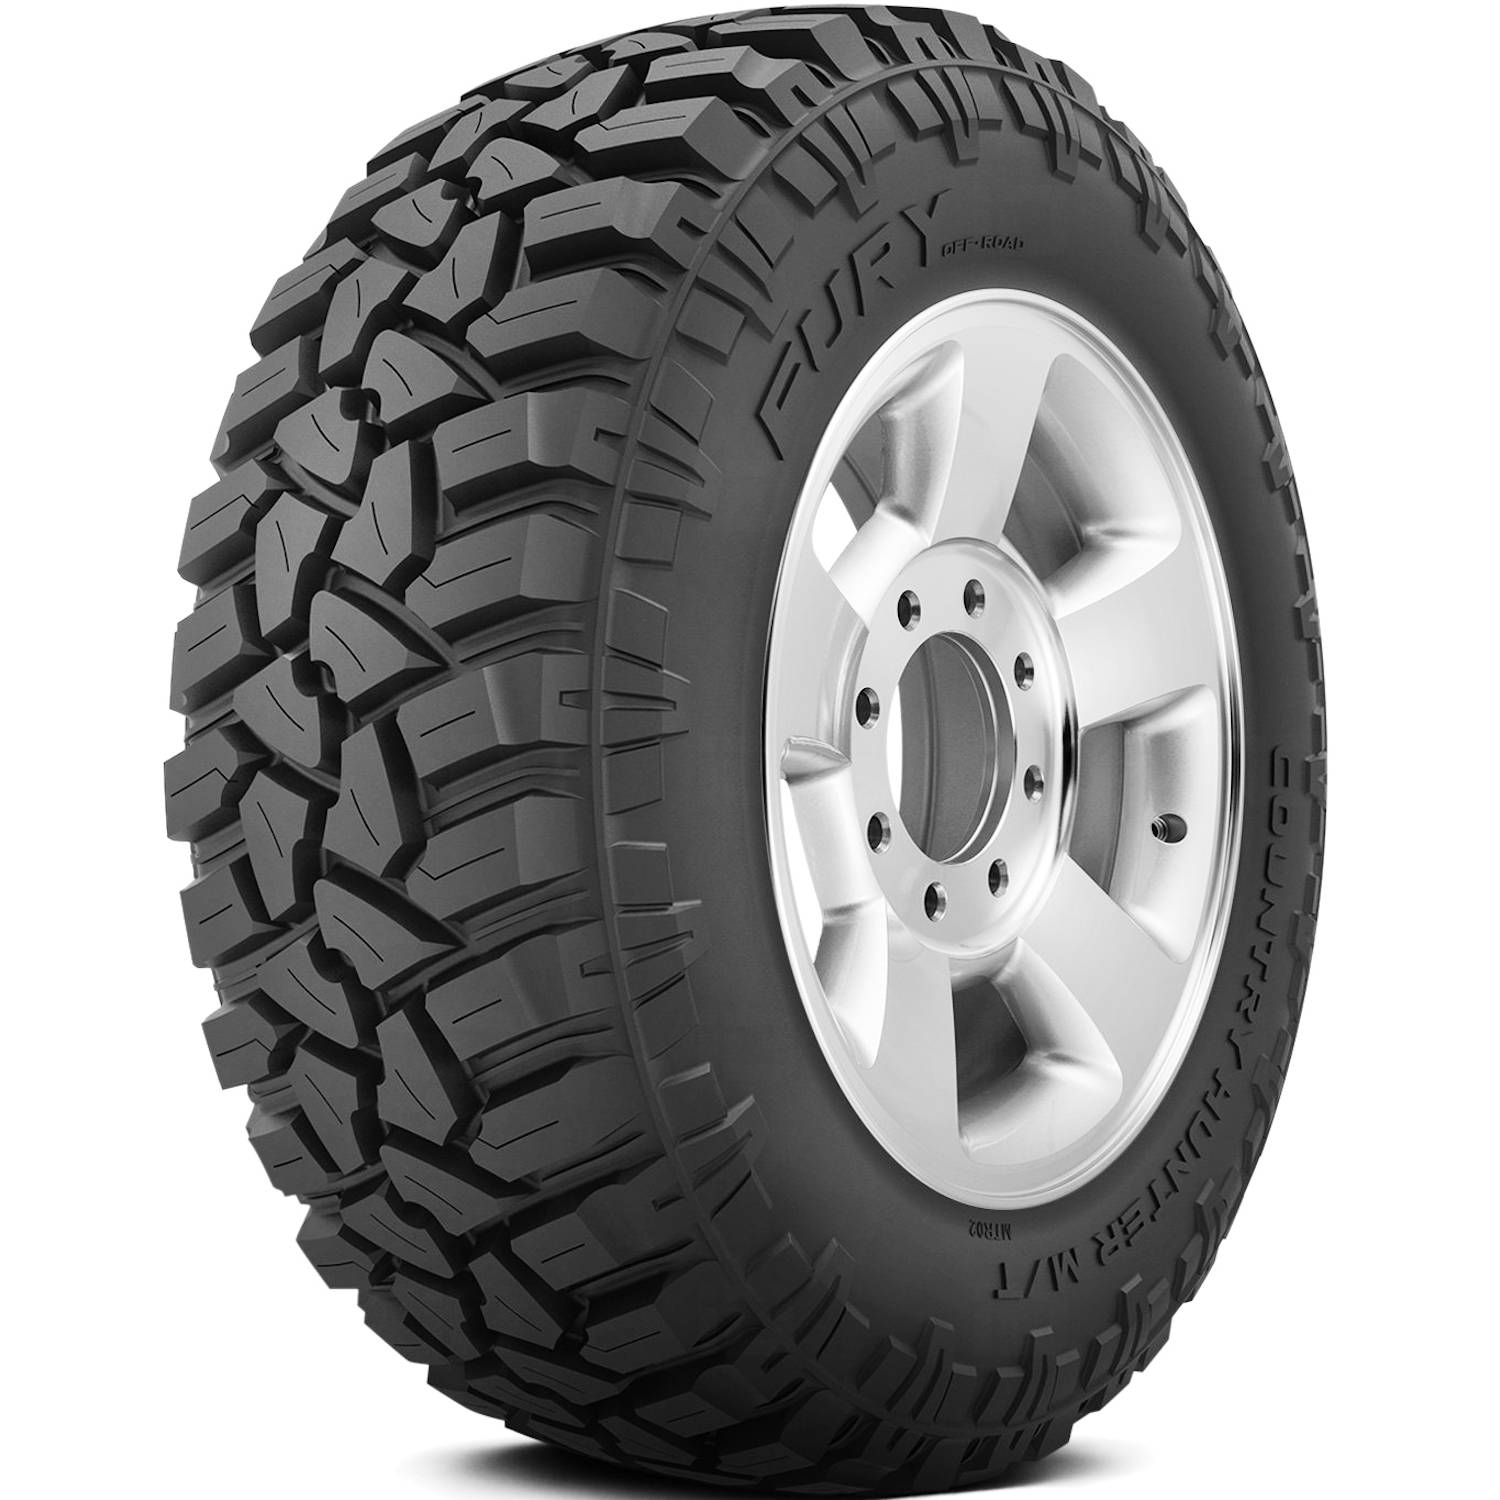 FURY OFFROAD COUNTRY HUNTER MTII 40X15.50R22LT Tires